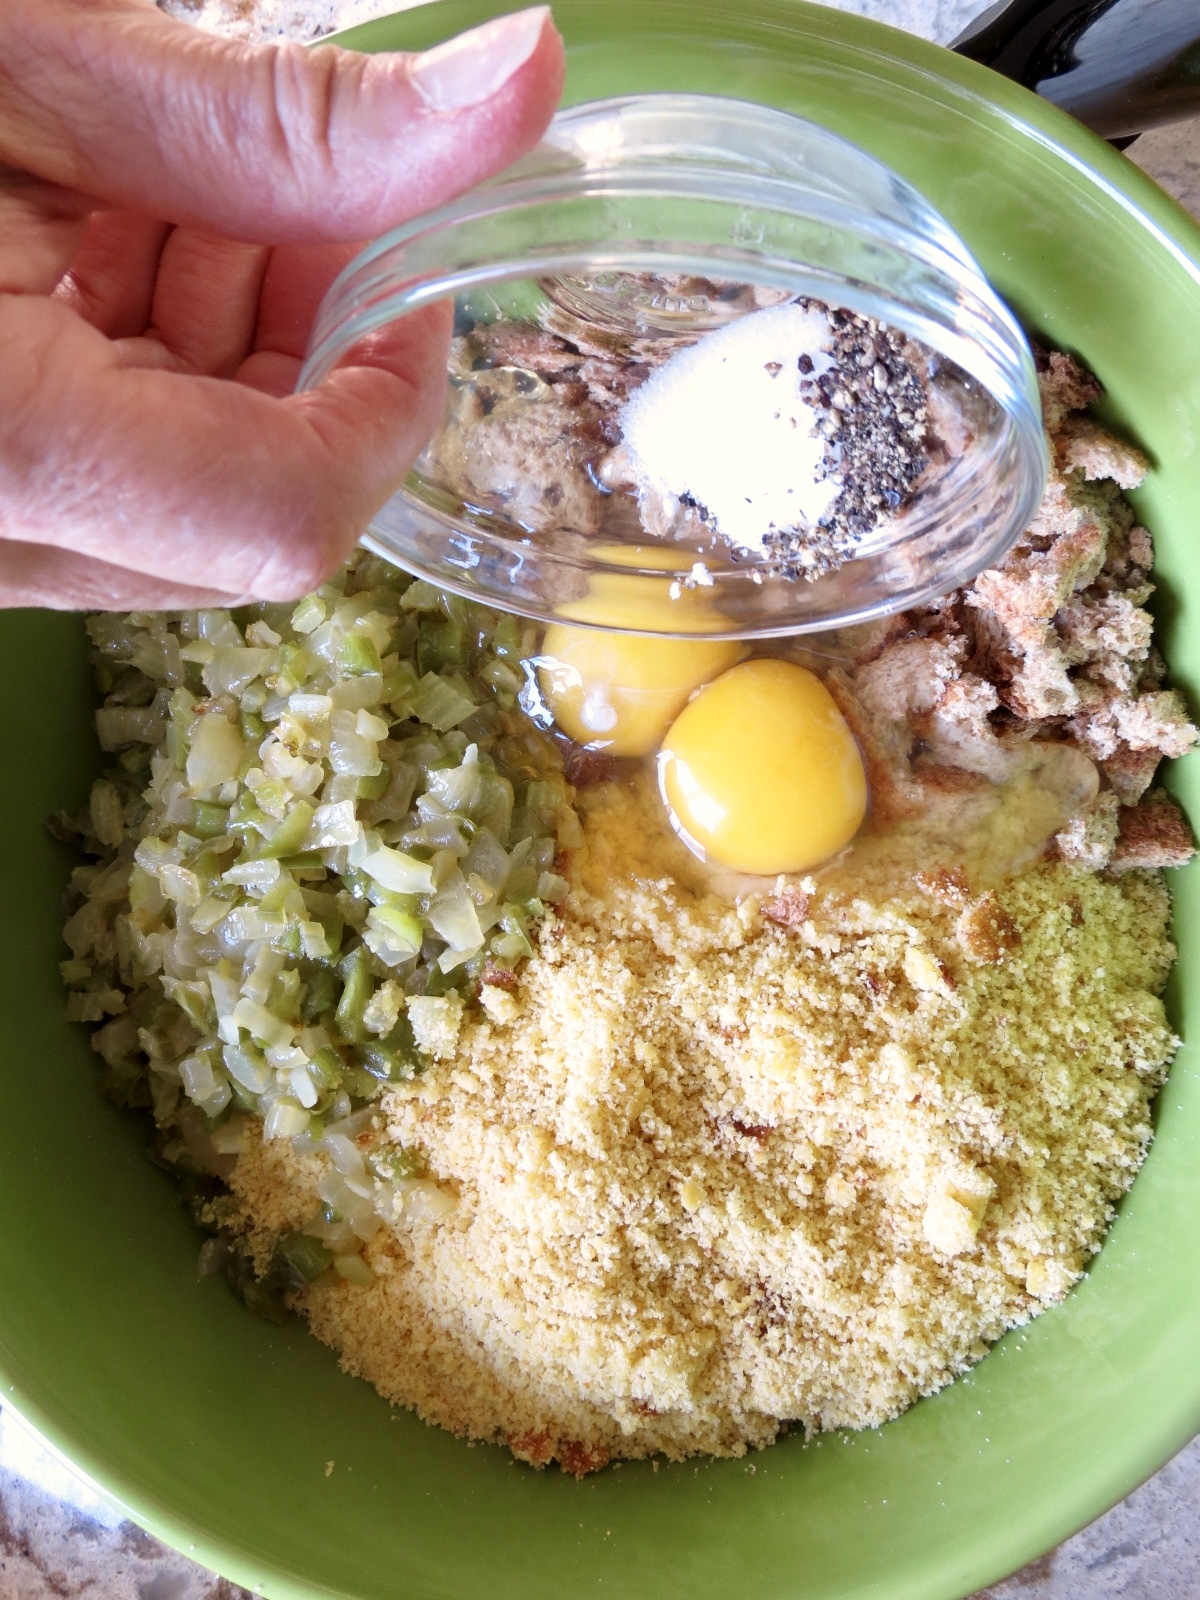 Cornbread, bread crumbs, eggs and vegetables in a green bowl with seasonings to make Cornbread Dressing.